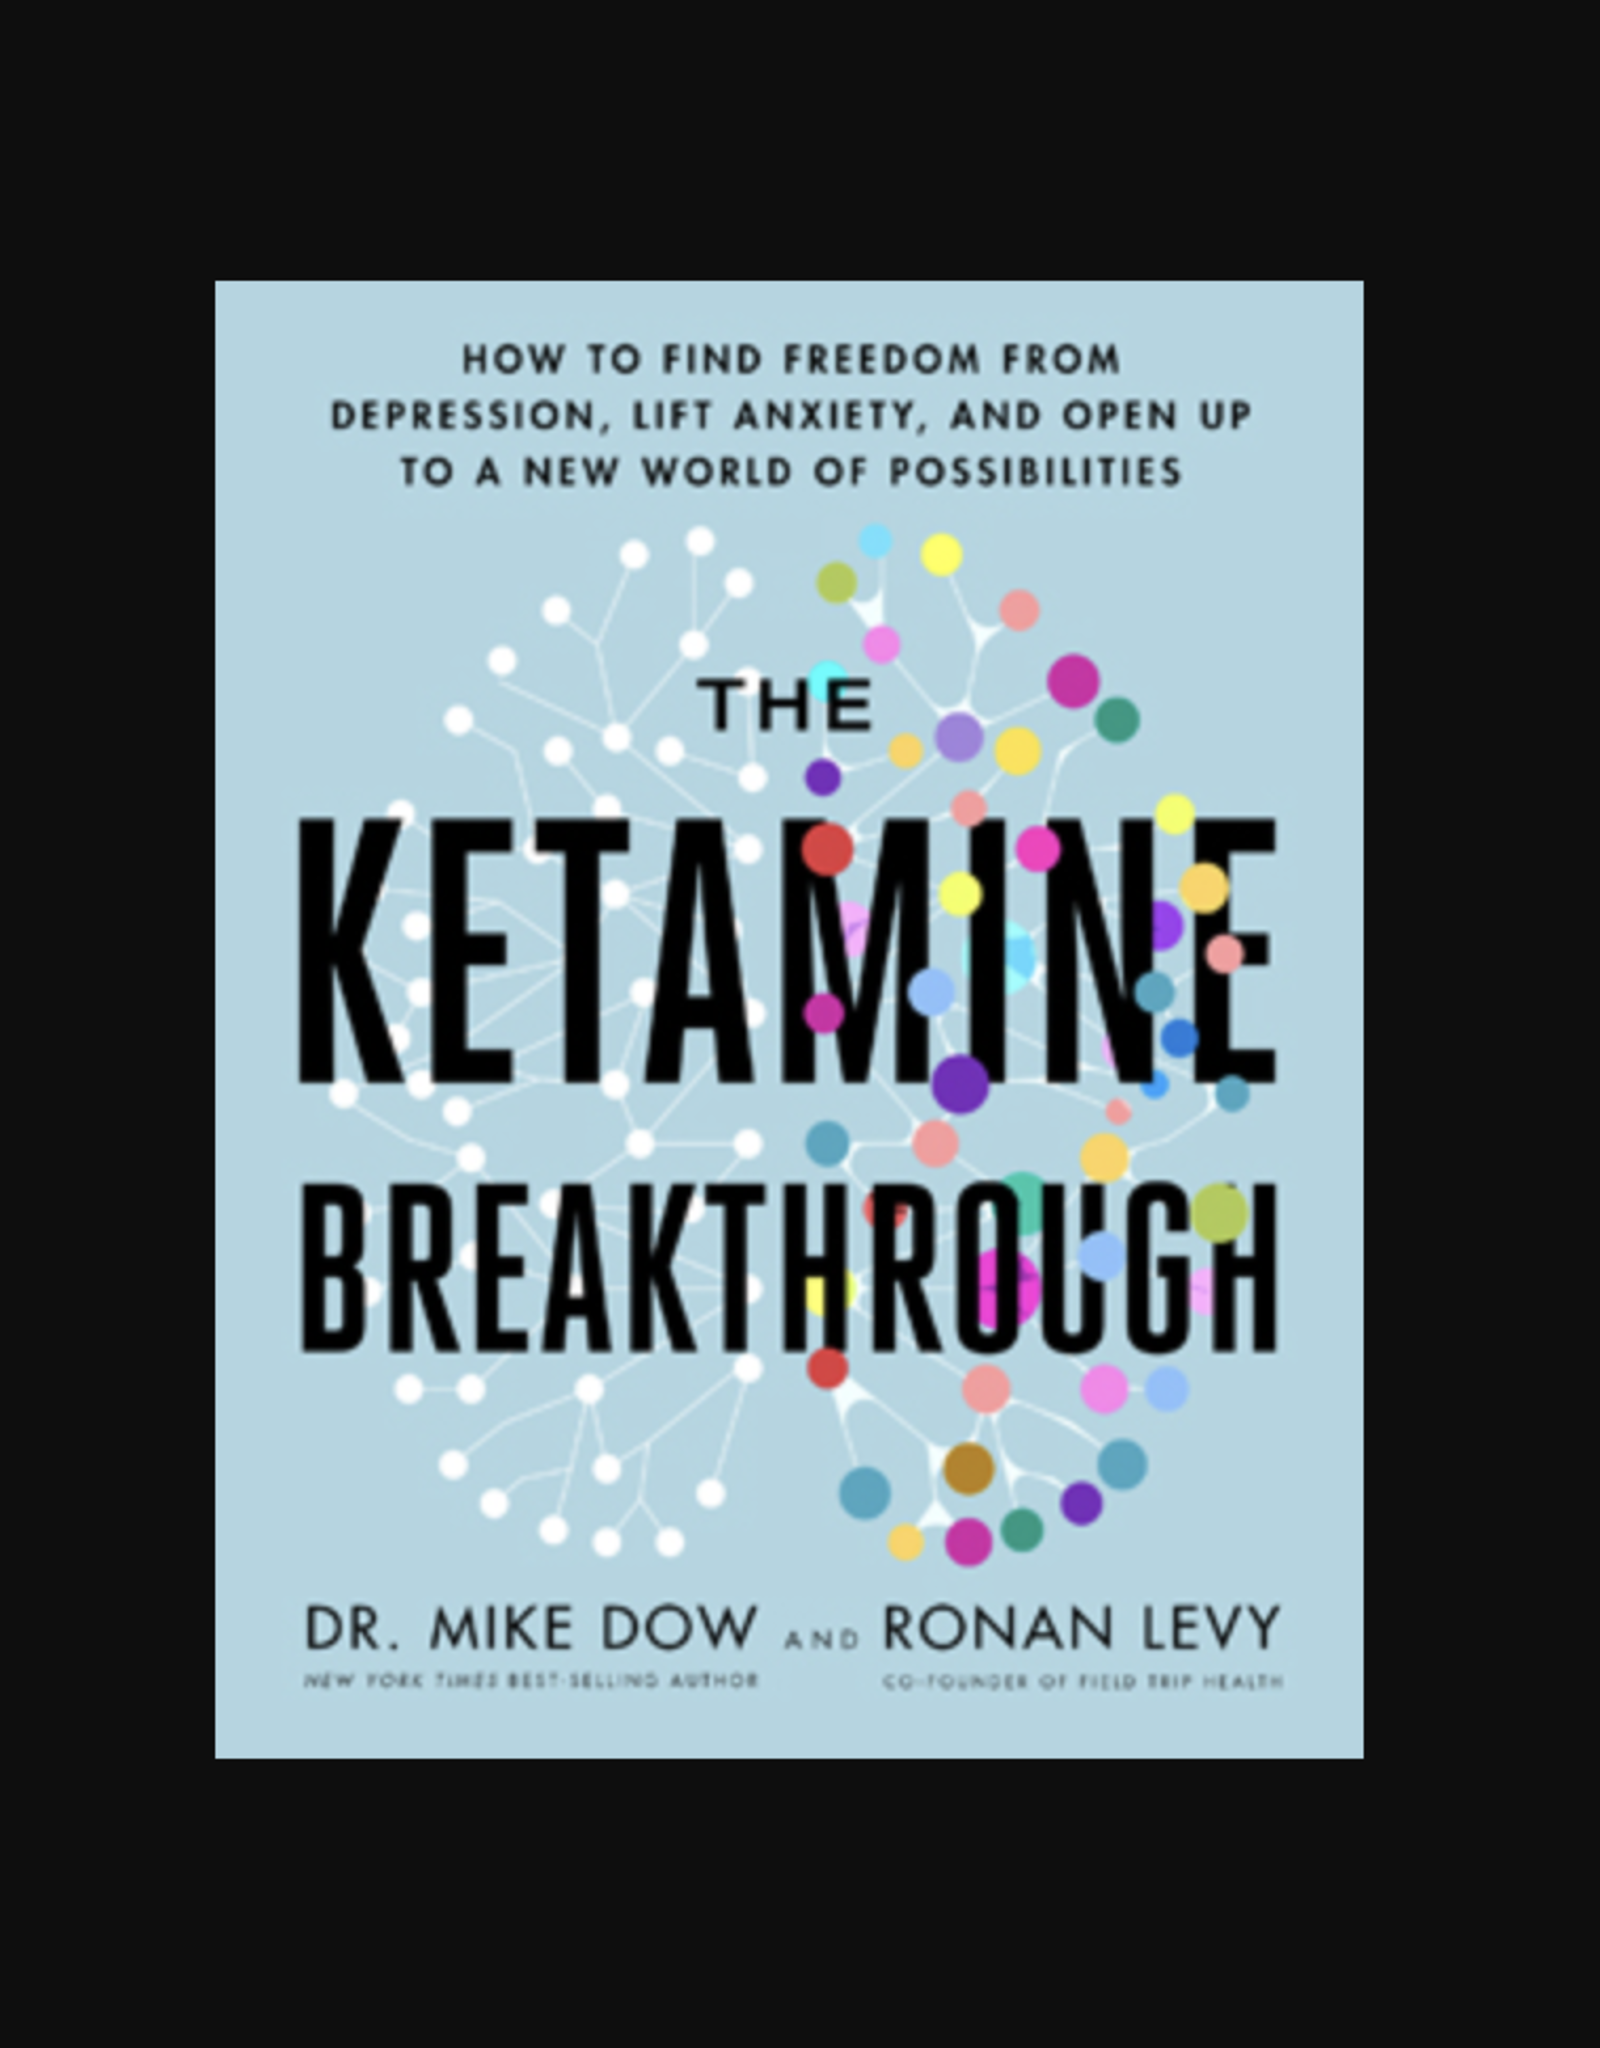 Ketamine Breakthrough - How to Find Freedom from Depression, Lift Anxiety, and Open Up to a New World of Possibilities